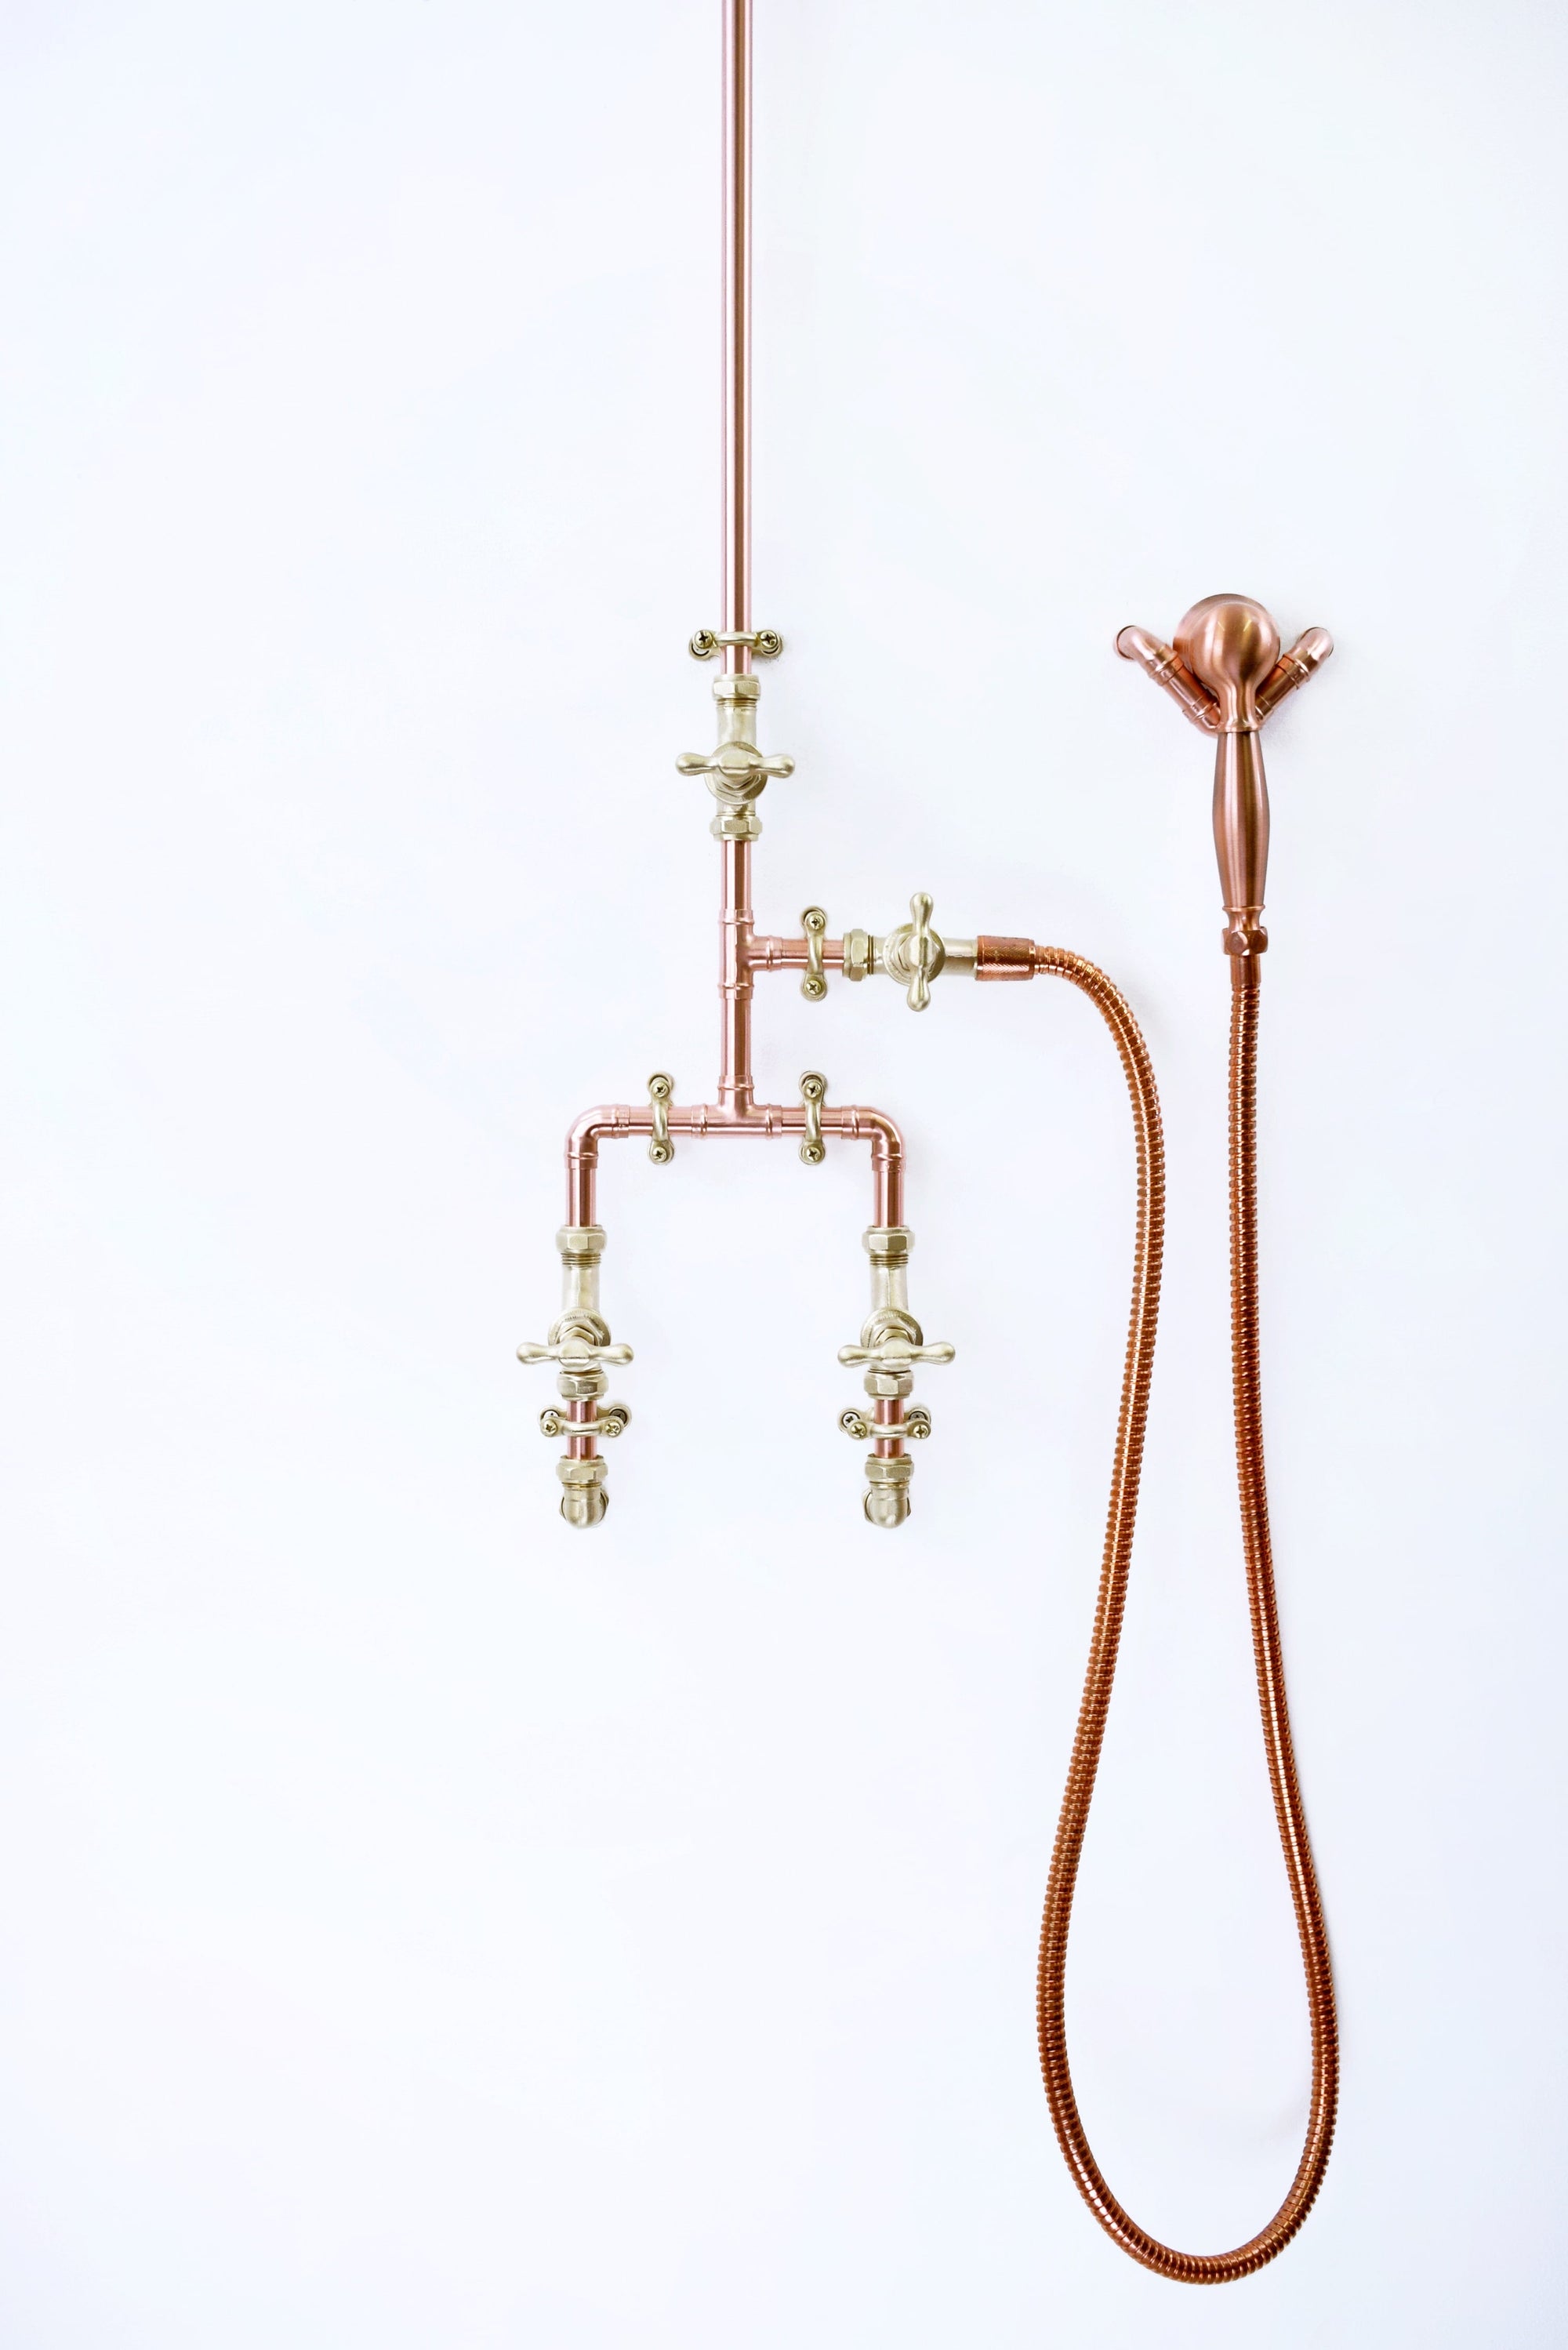 Get the spa treatment at home with our luxurious copper shower and handset, designed to deliver a soothing and rejuvenating shower experience - Proper Copper